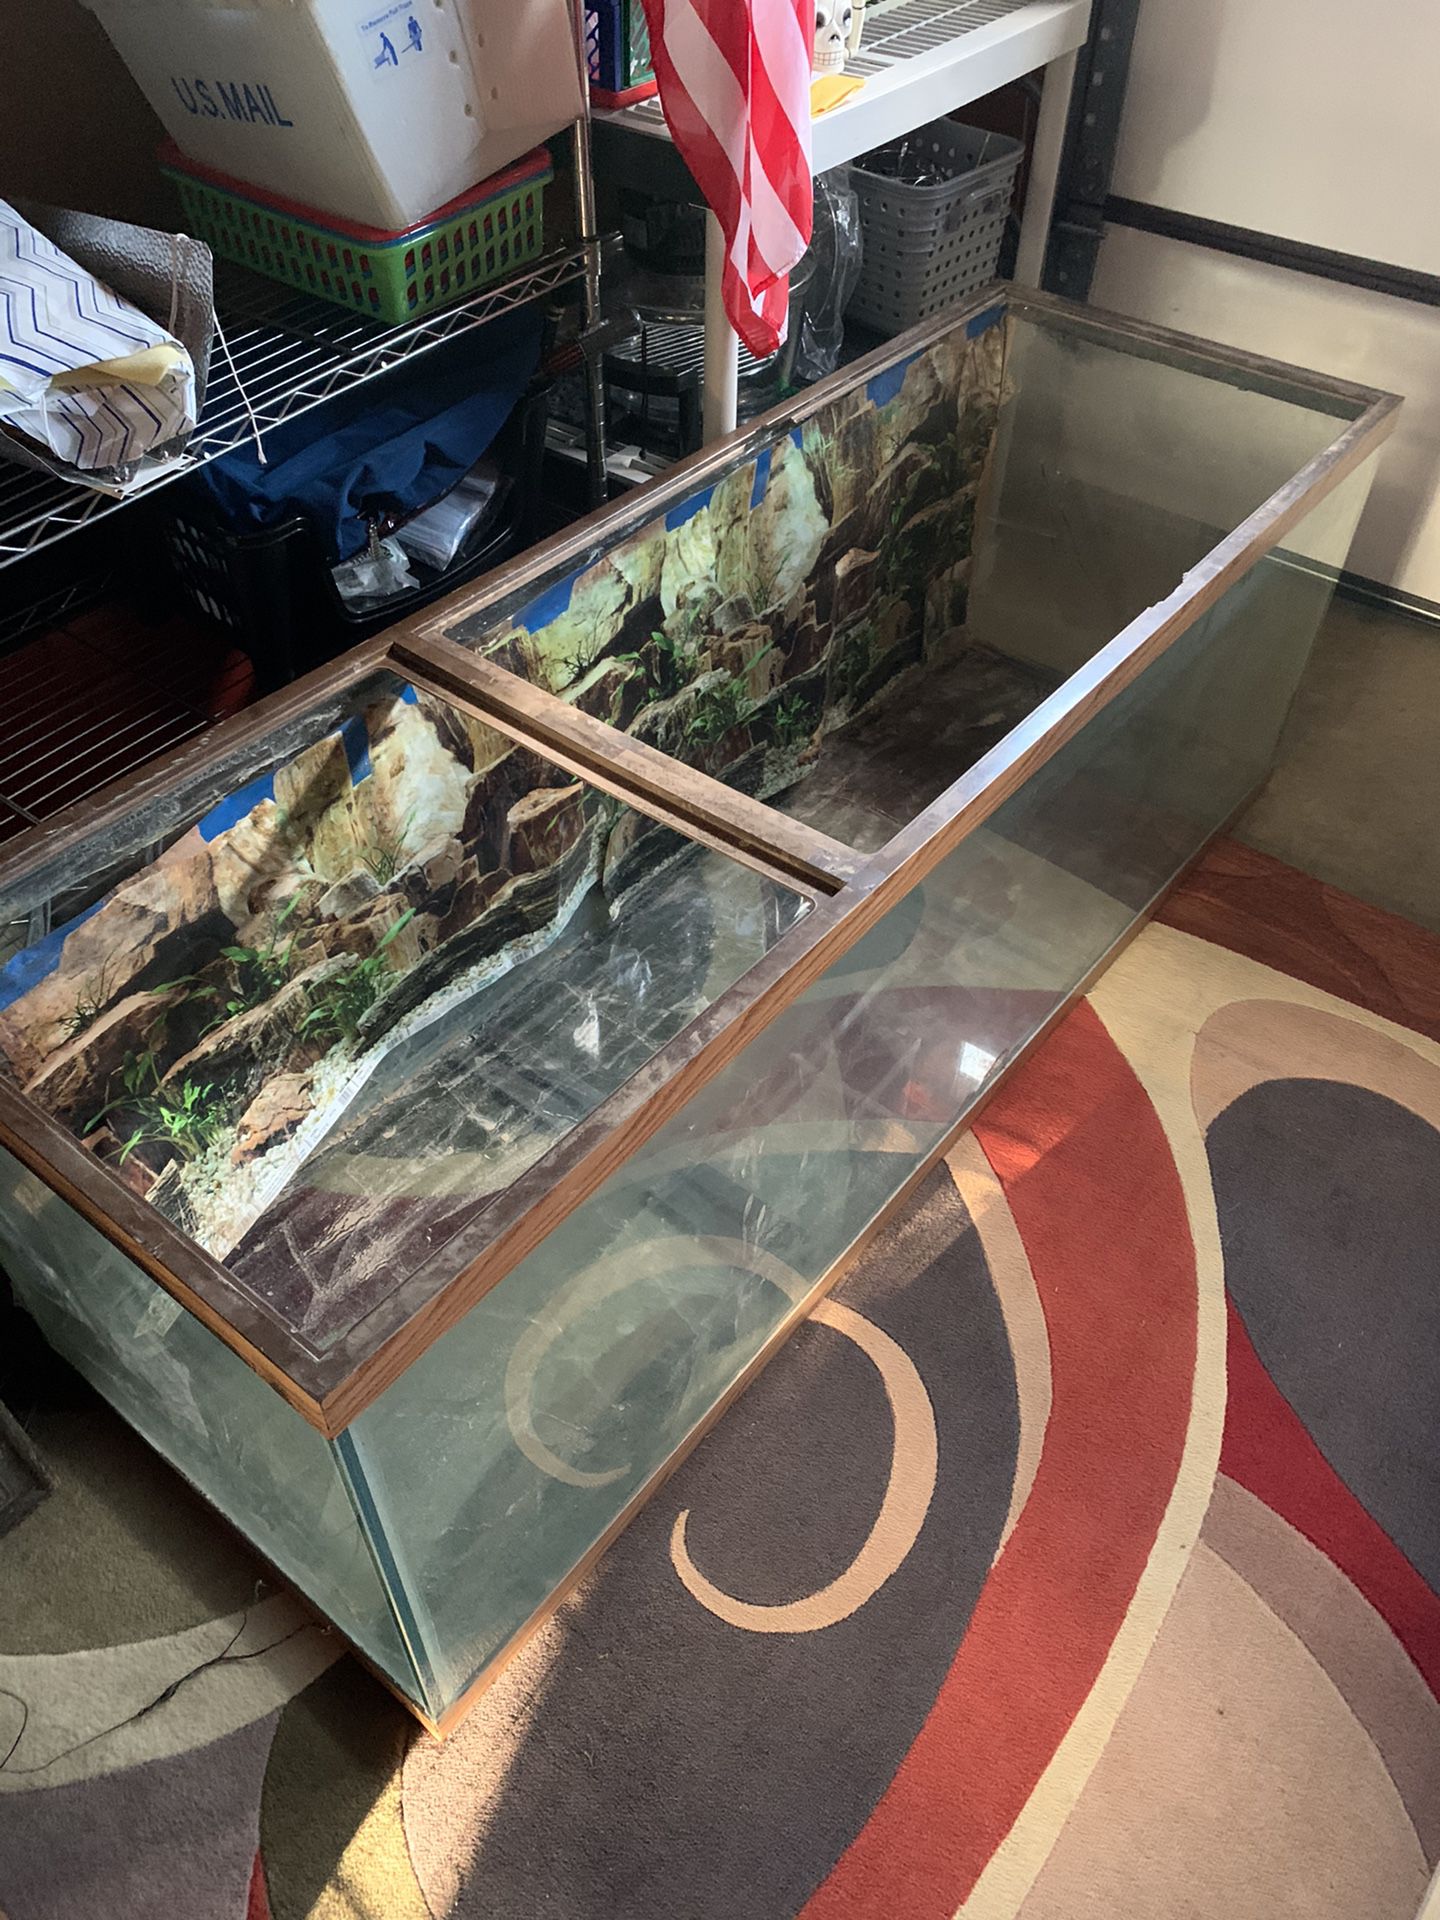 6’ X 2’5 X 2’ Large Fish Tank With Built Stand ( Hood missing / Mirror on stand damaged)